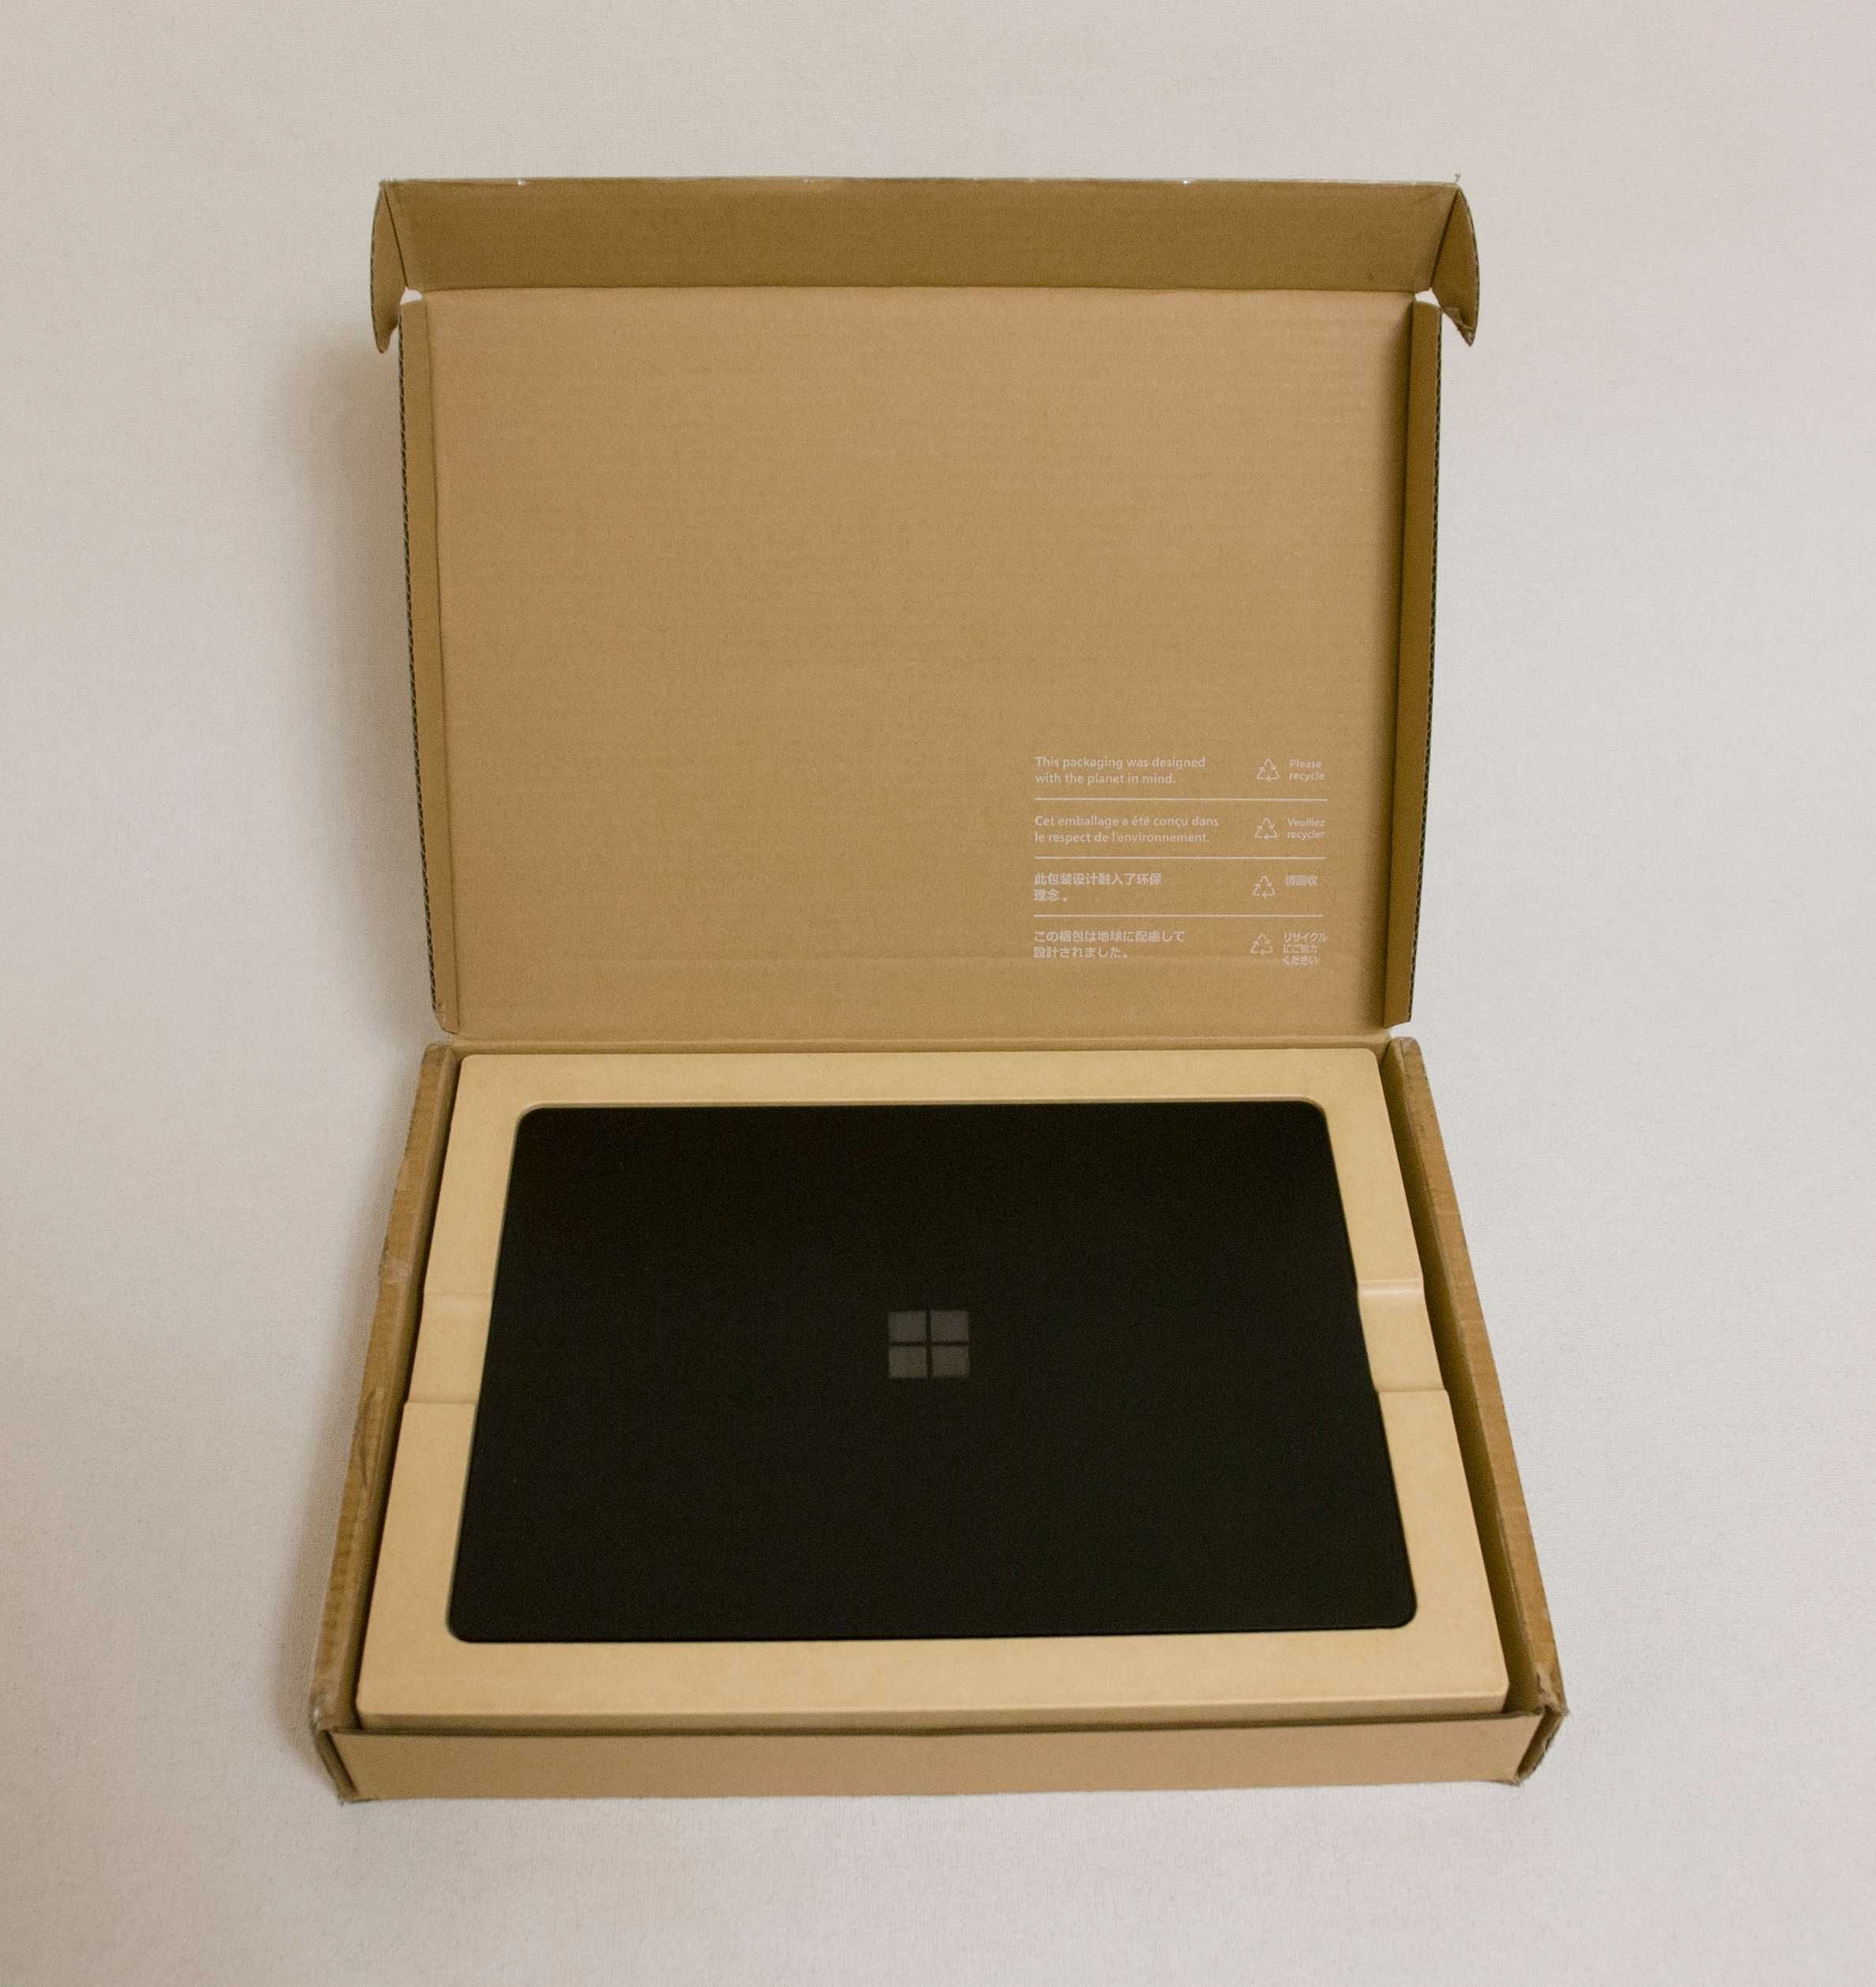 Microsoft Surface Laptop 4 13.5 Touch i7-1185G7/32gb DDR4/1Tb NVMe SSD